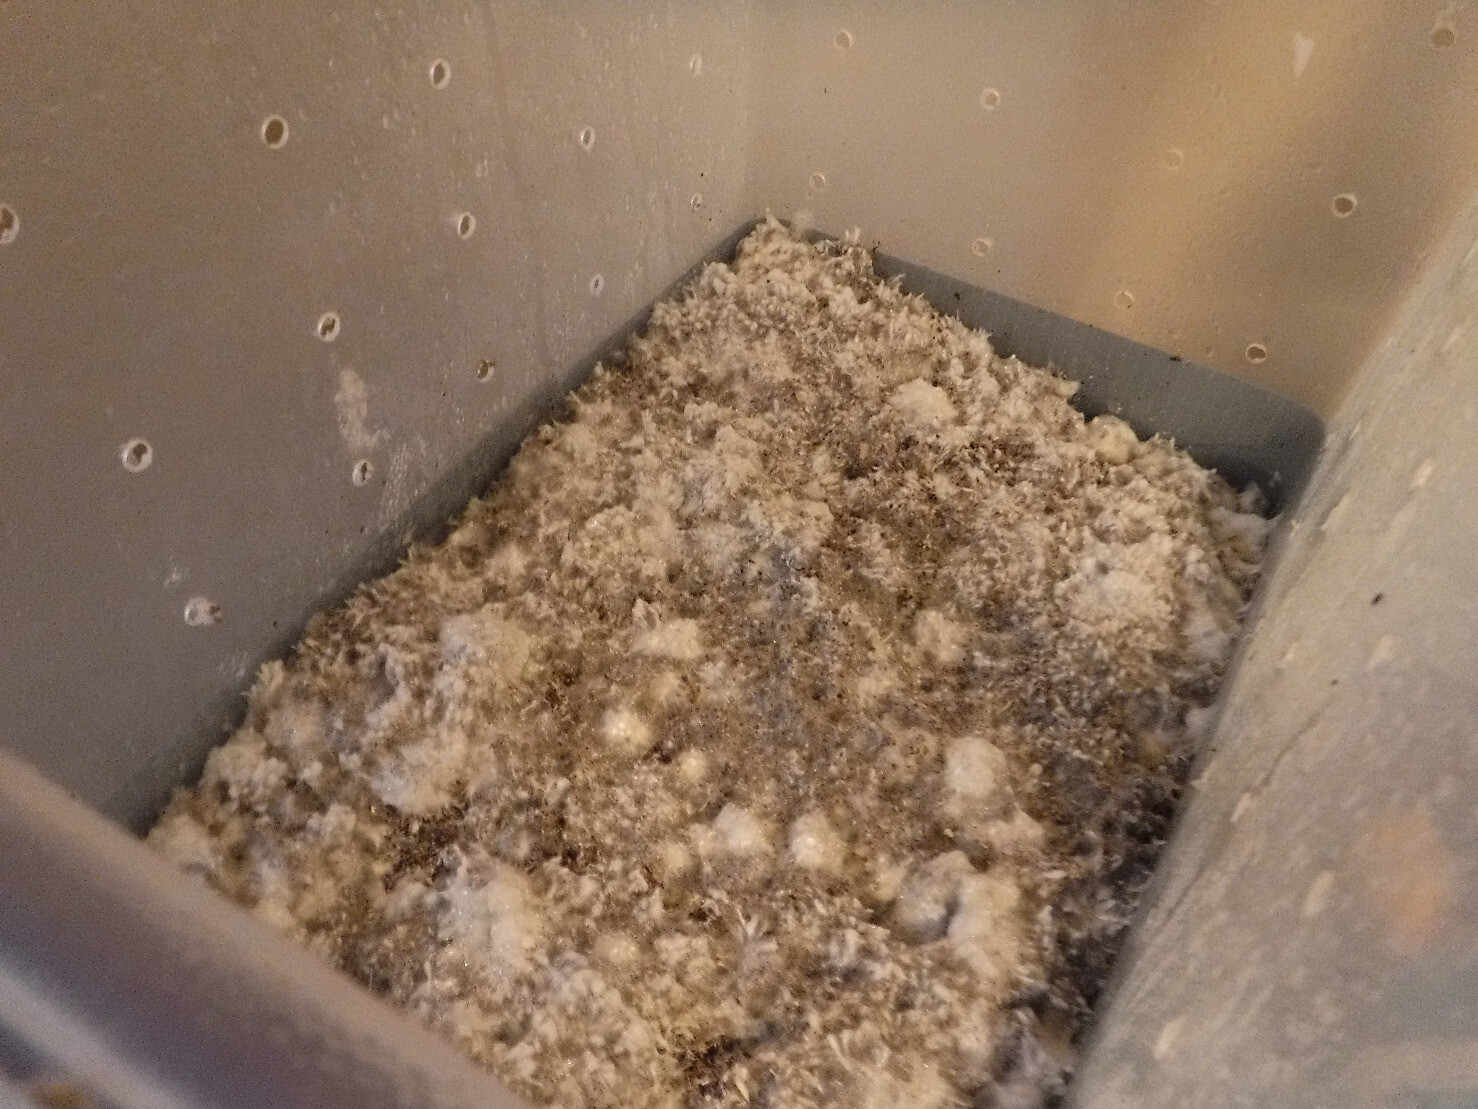 inside the container the mycelium has fully taken over the substrate, some small bulbs are starting to appear